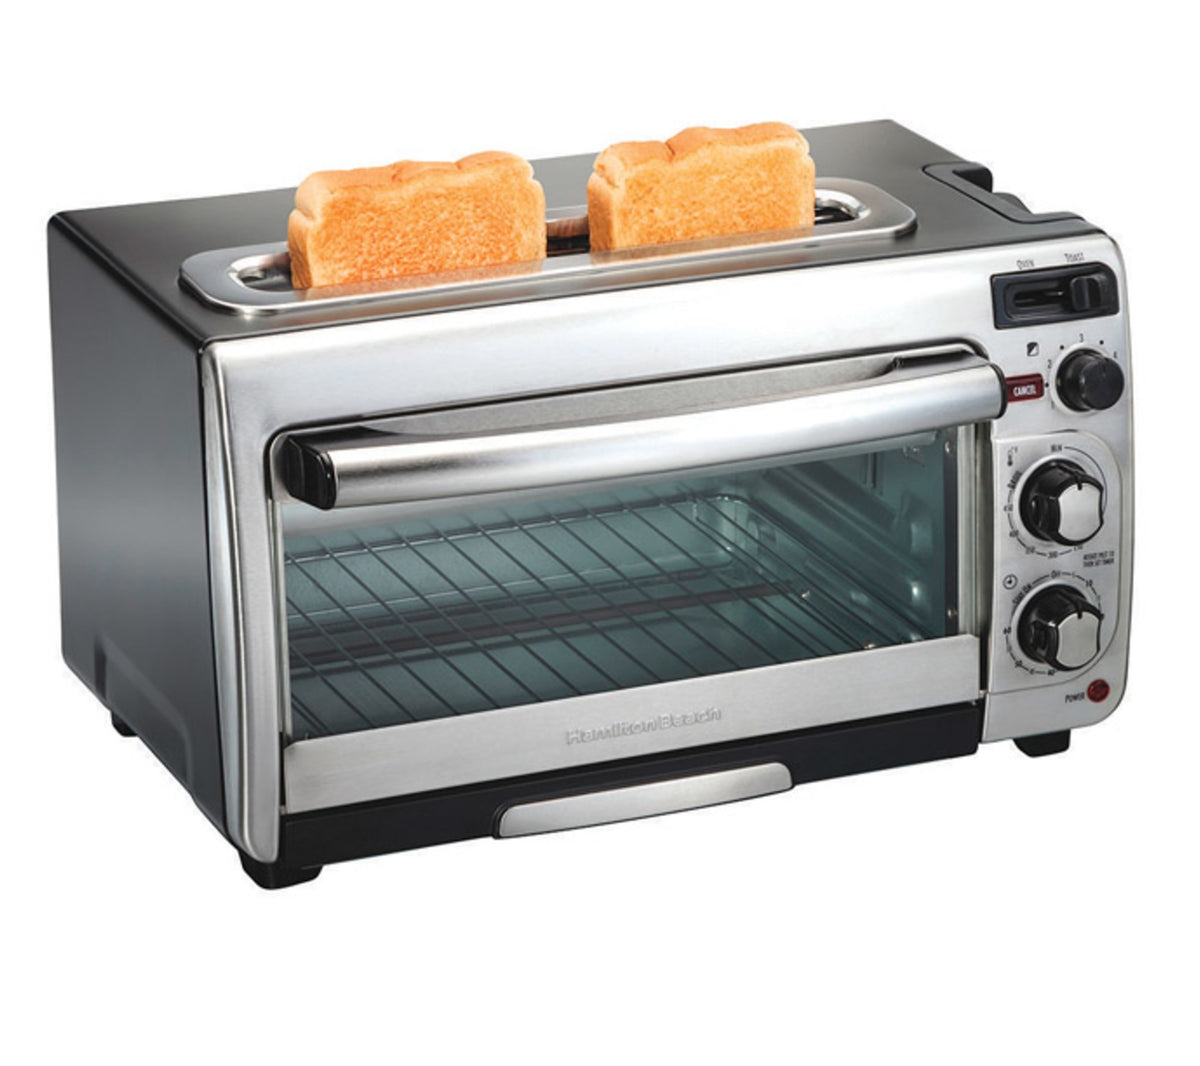 Buy 31156 hamilton beach - Online store for small appliances, toaster oven in USA, on sale, low price, discount deals, coupon code